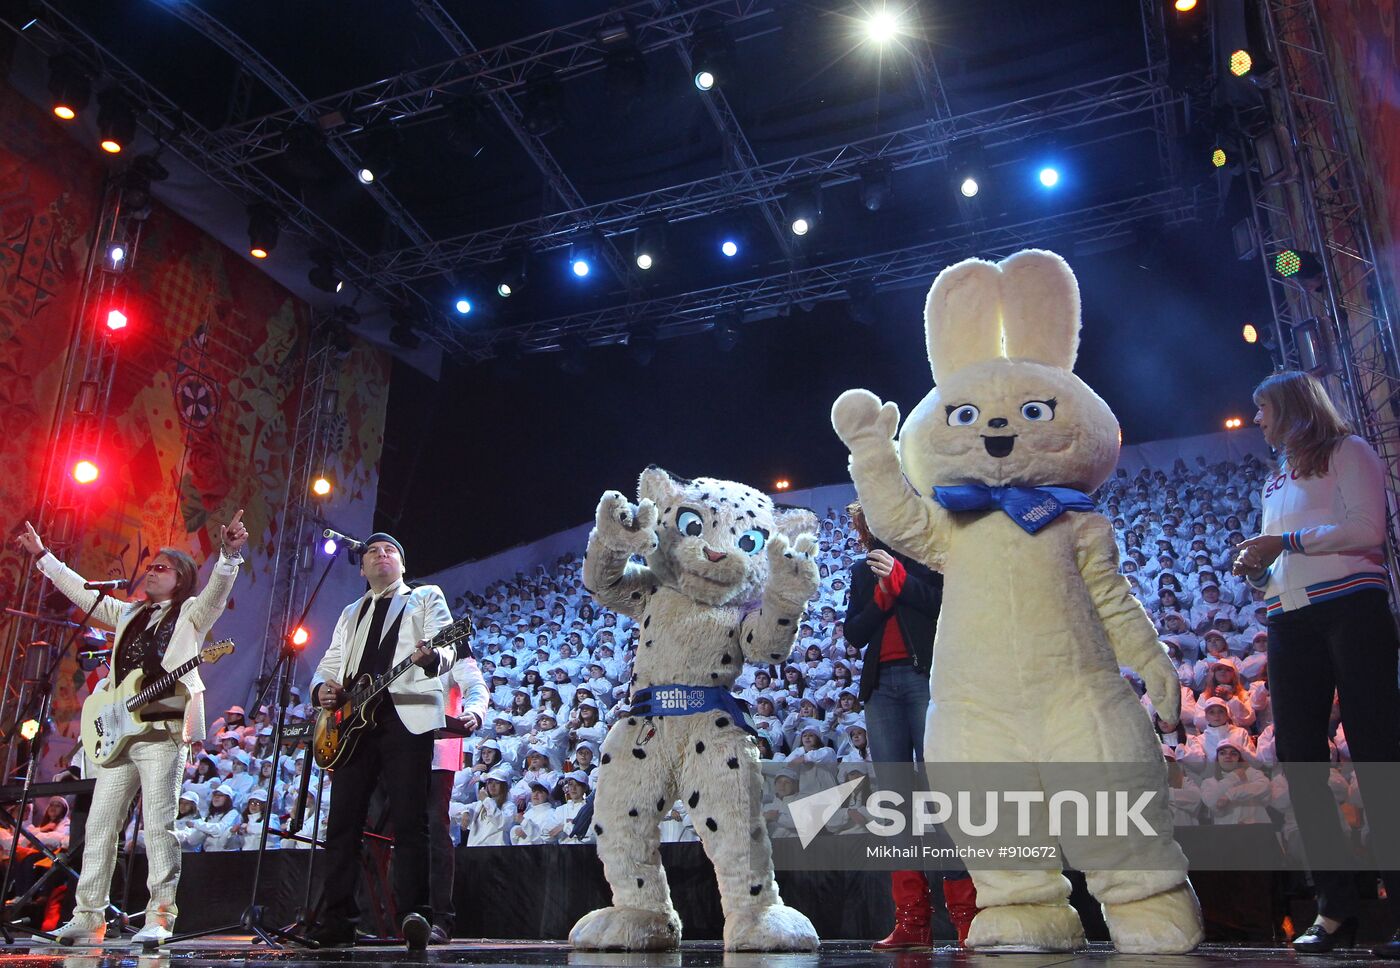 "1000 Days to the Olympics in Sochi" concert on Red Square